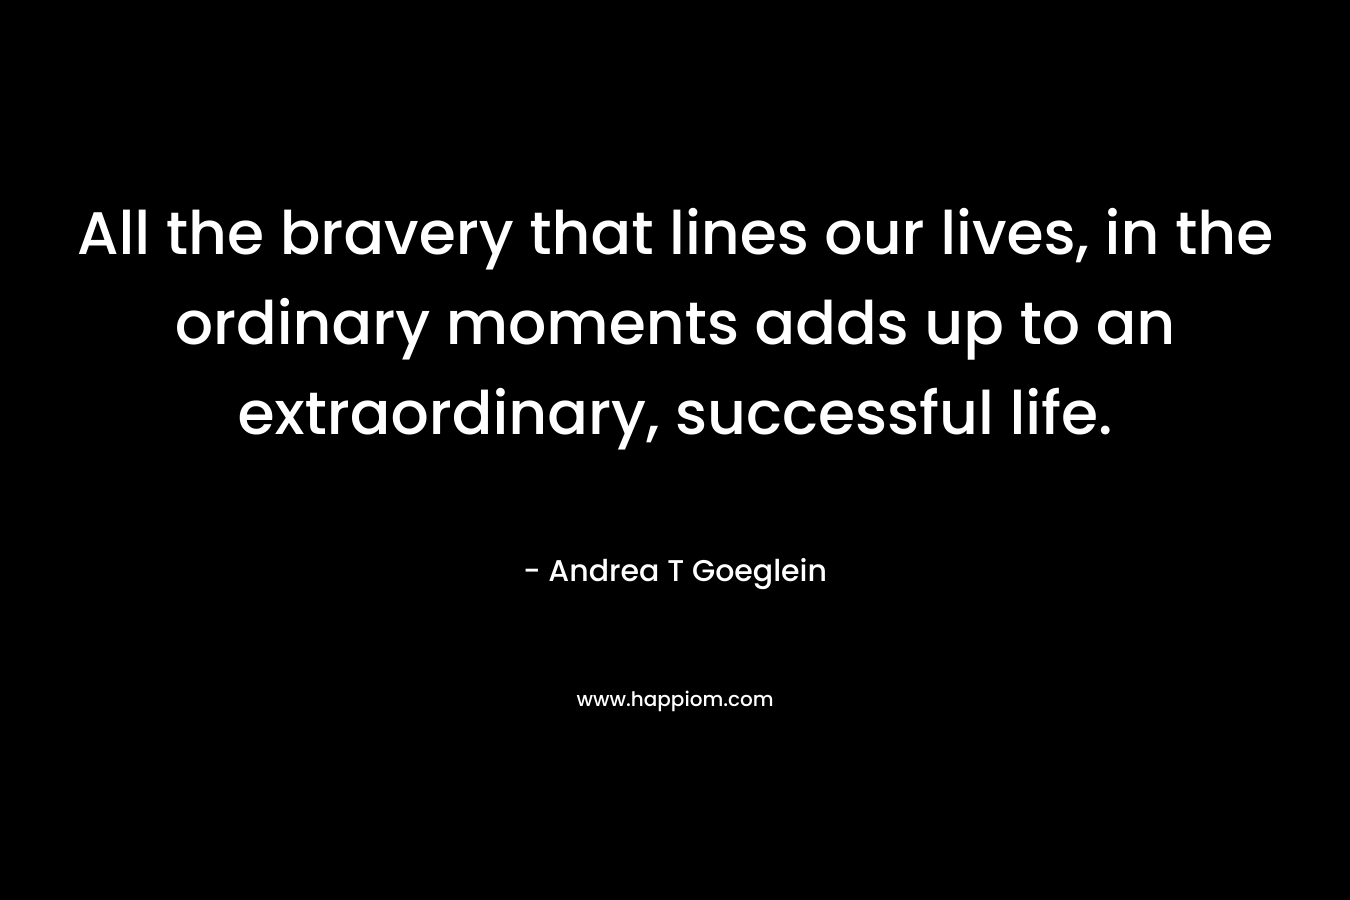 All the bravery that lines our lives, in the ordinary moments adds up to an extraordinary, successful life. – Andrea T Goeglein